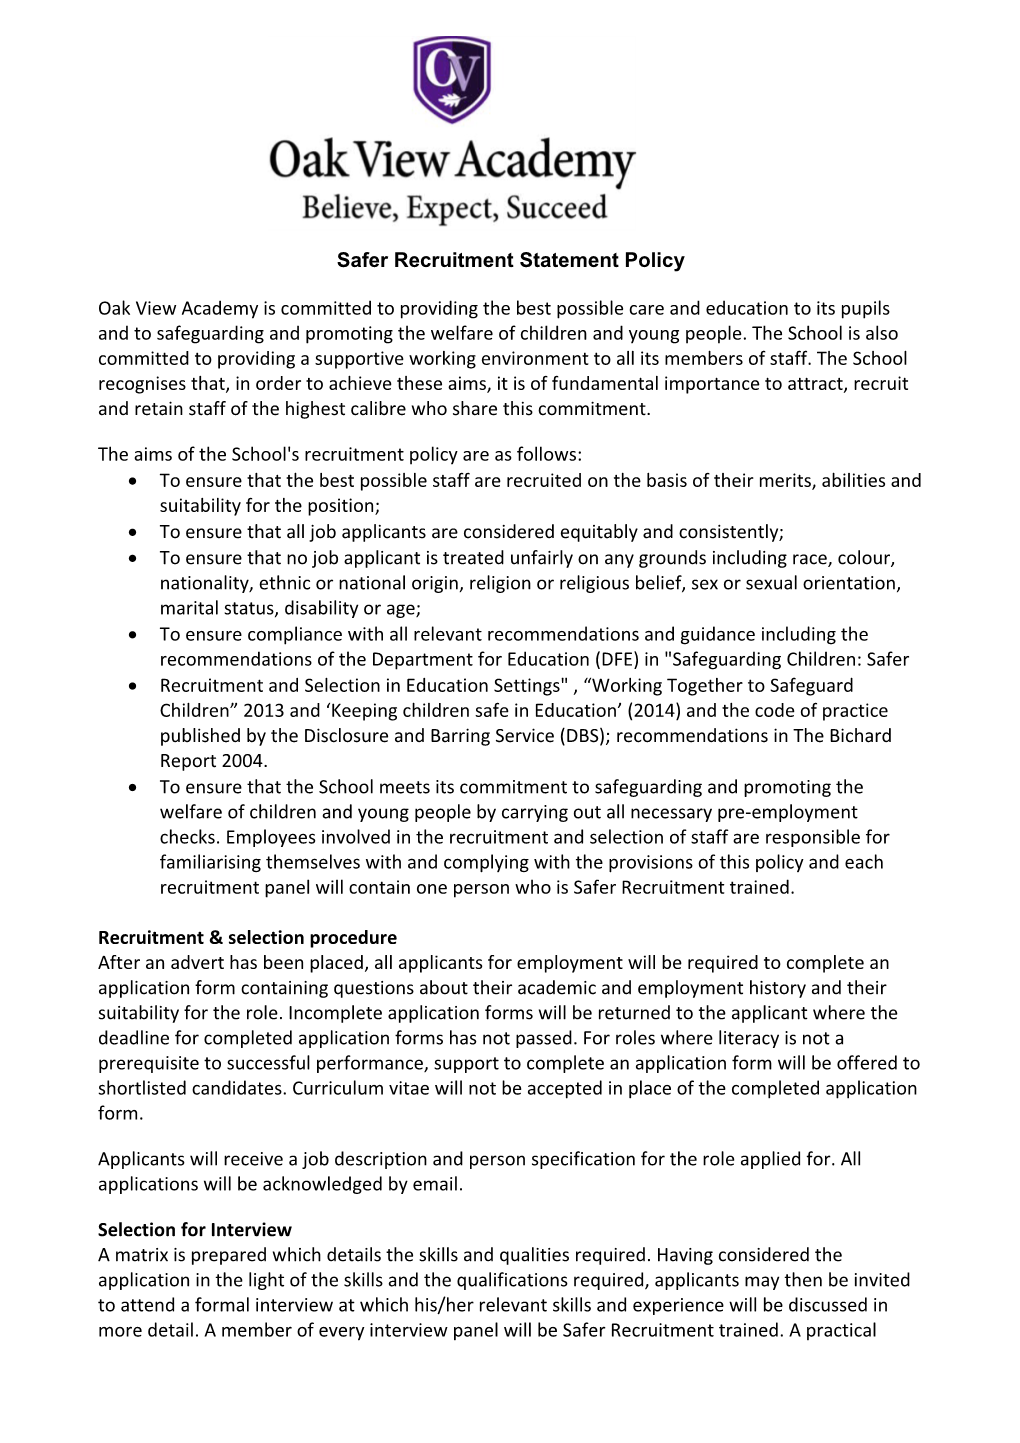 Safer Recruitment Statement Policy